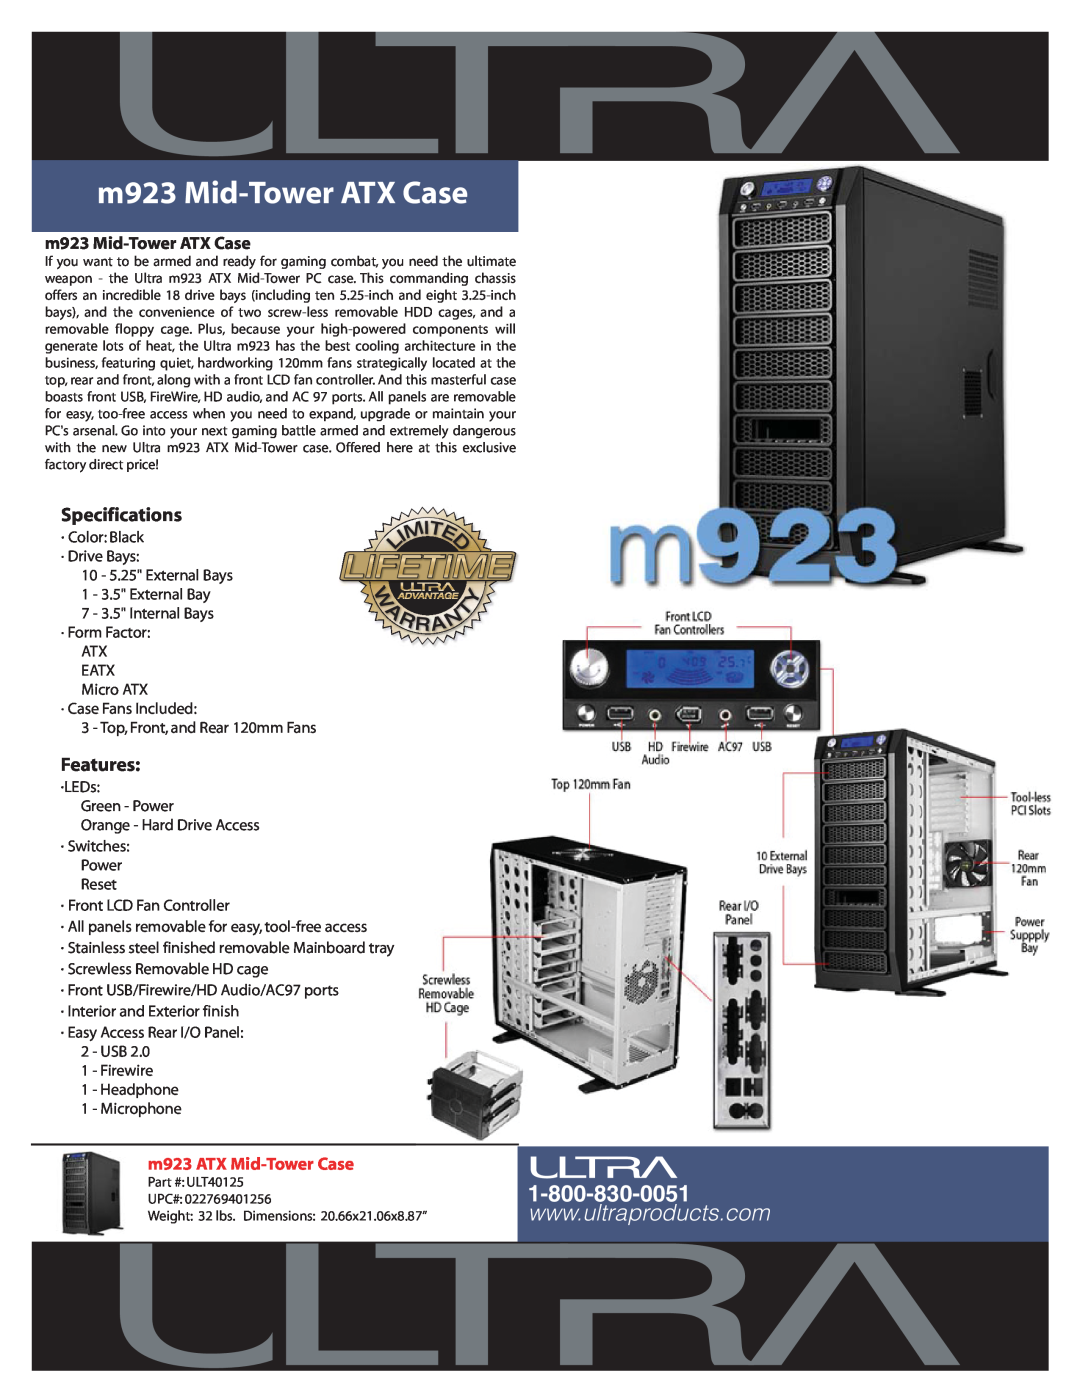 Ultra Products specifications m923 Mid-Tower ATX Case, Specifications, Features, m923 ATX Mid-Tower Case 